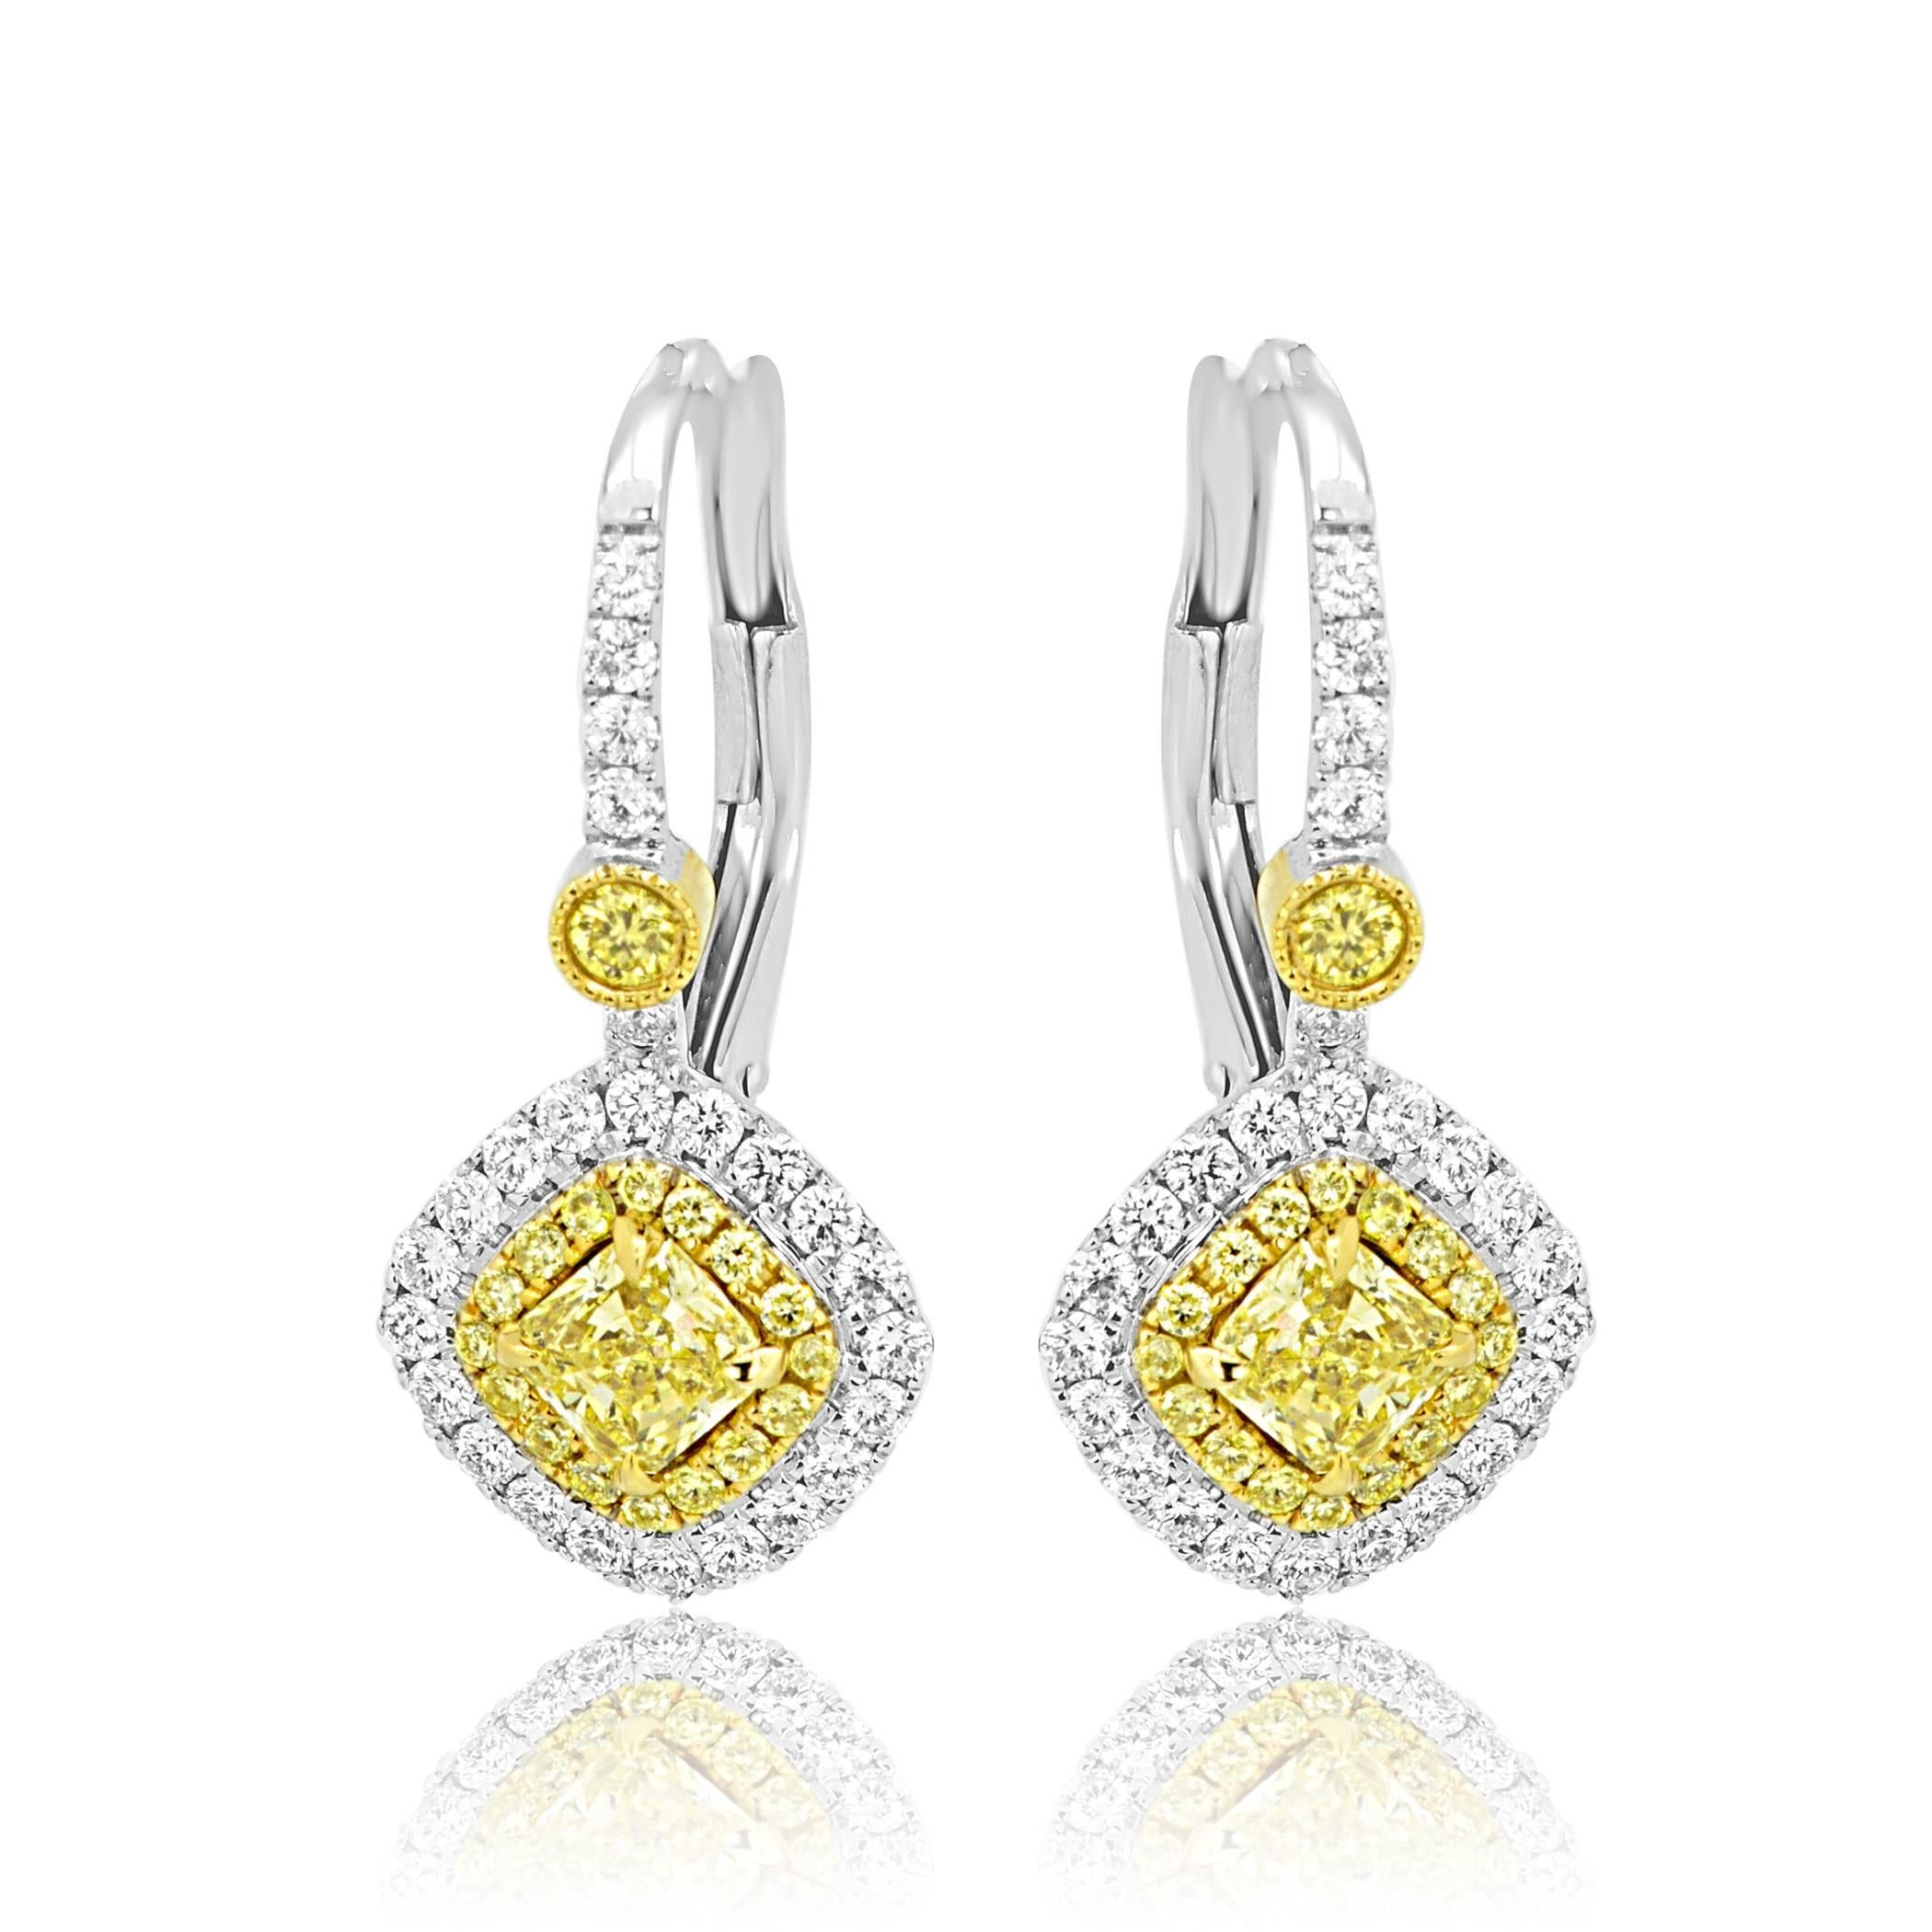 2 Natural Fancy Yellow Radiant 0.65 Carat Encircled in Double Halo of Natural Yellow Diamond 0.25 Carat and White Diamond 0.50 Carat In 18K White and Yellow Gold Fashion Drop Dangle Earring.

Style available in different price ranges. Prices are